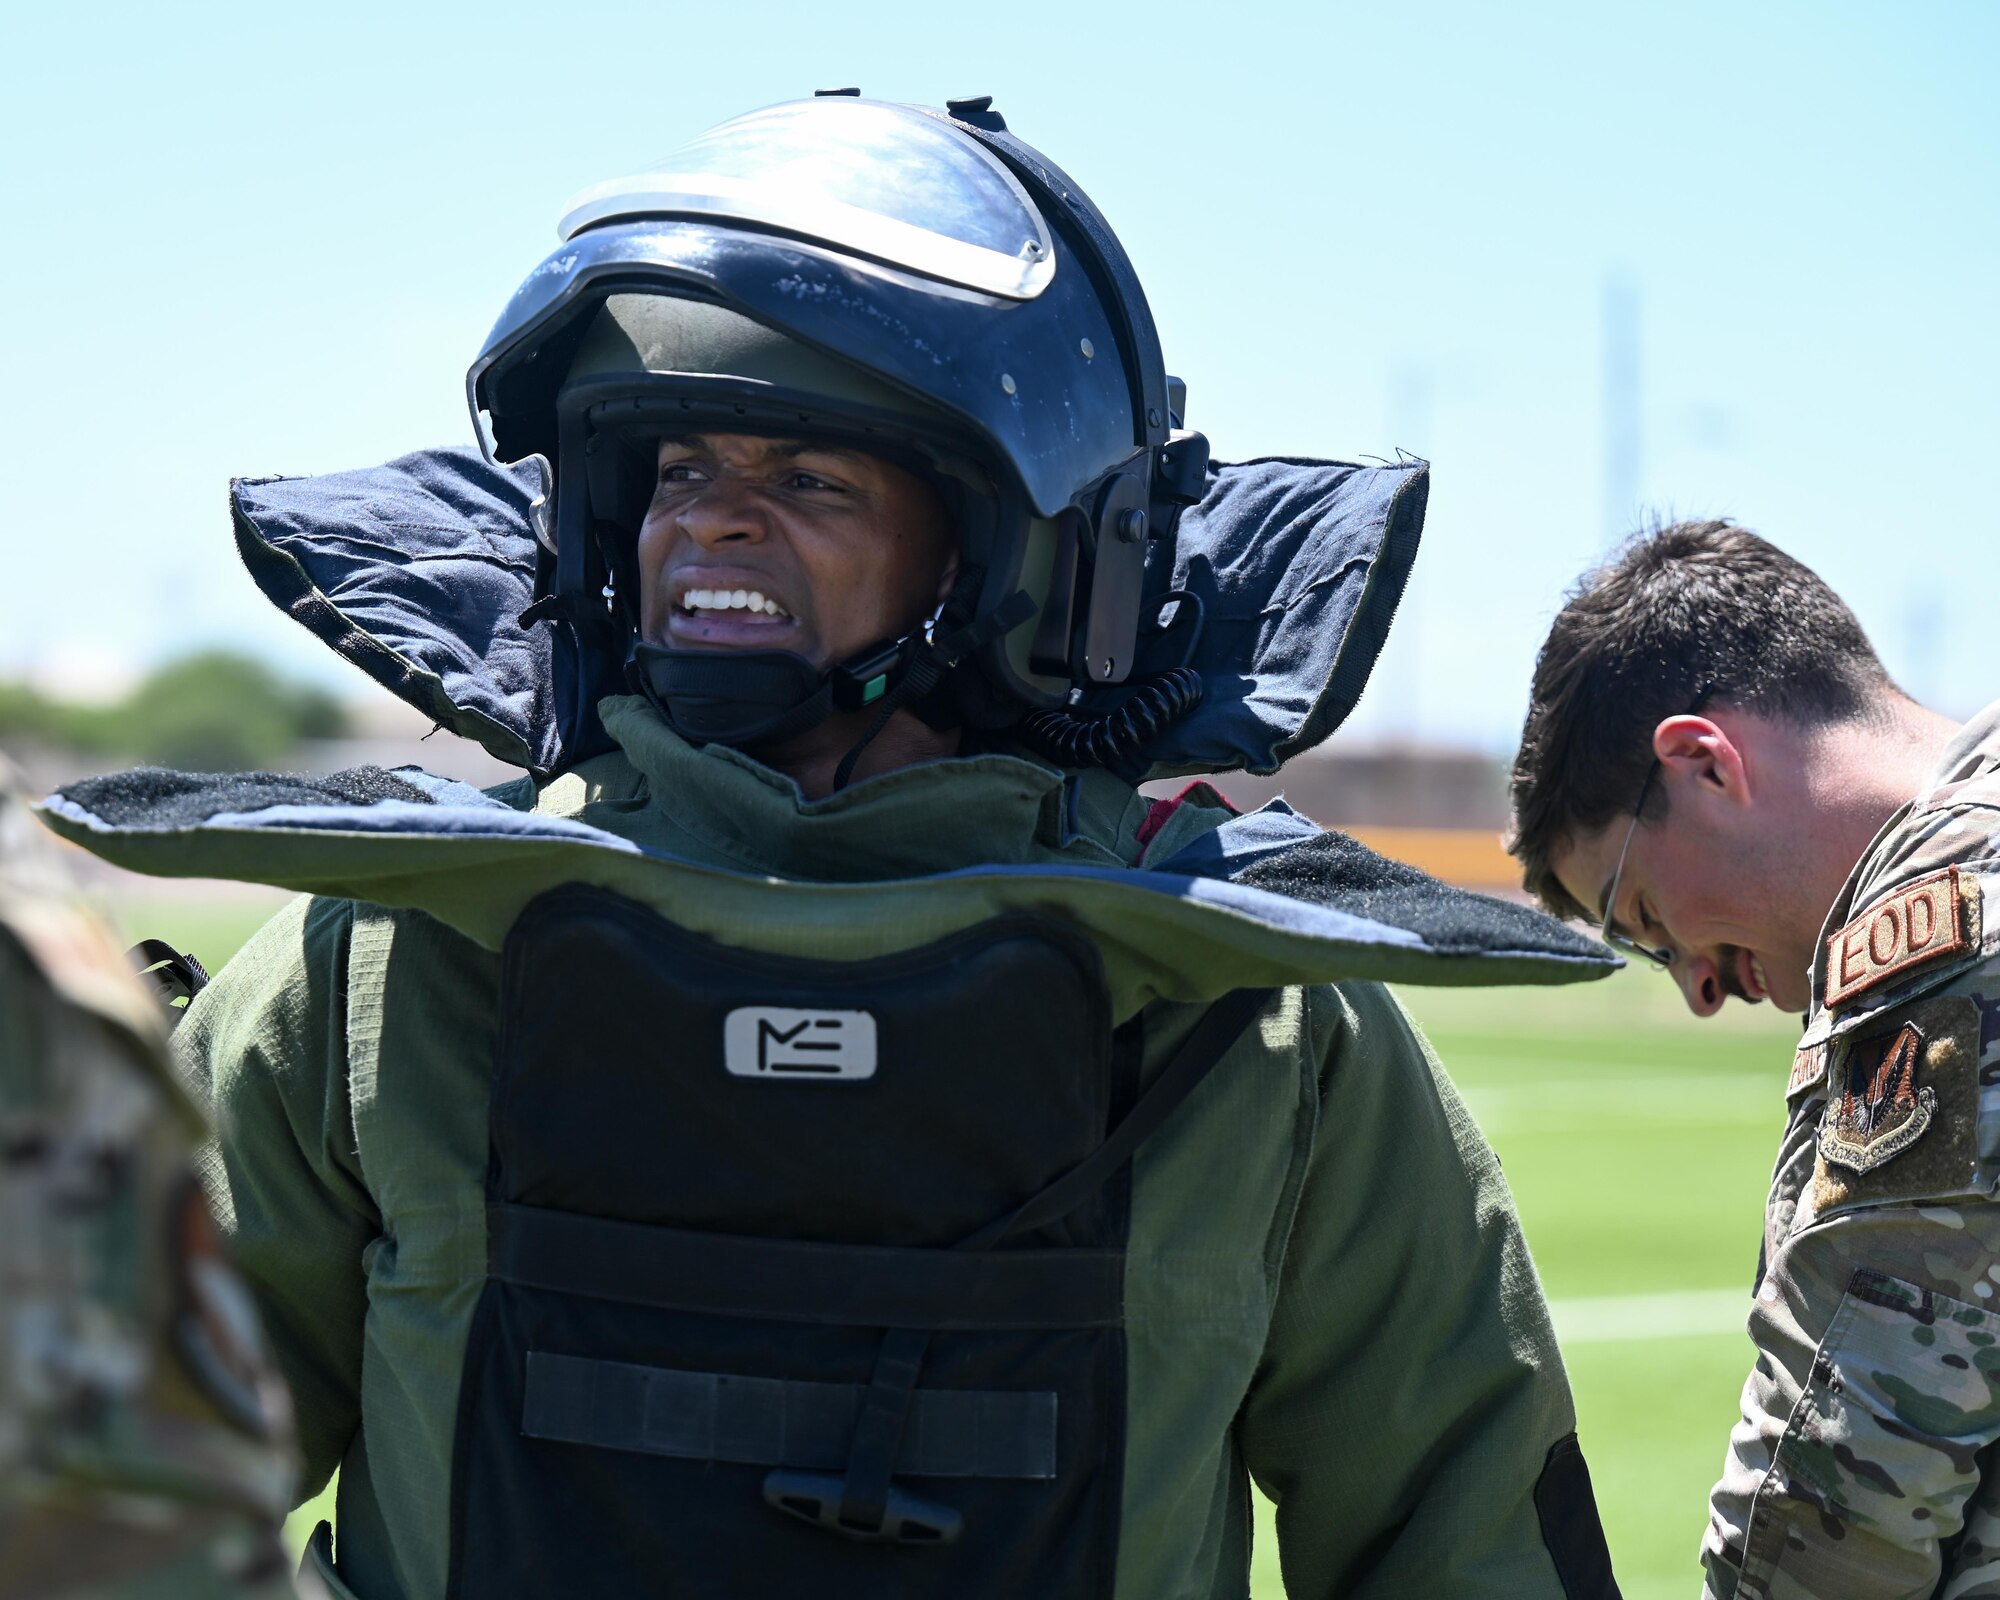 A photo of a man smiling in a bomb suit.